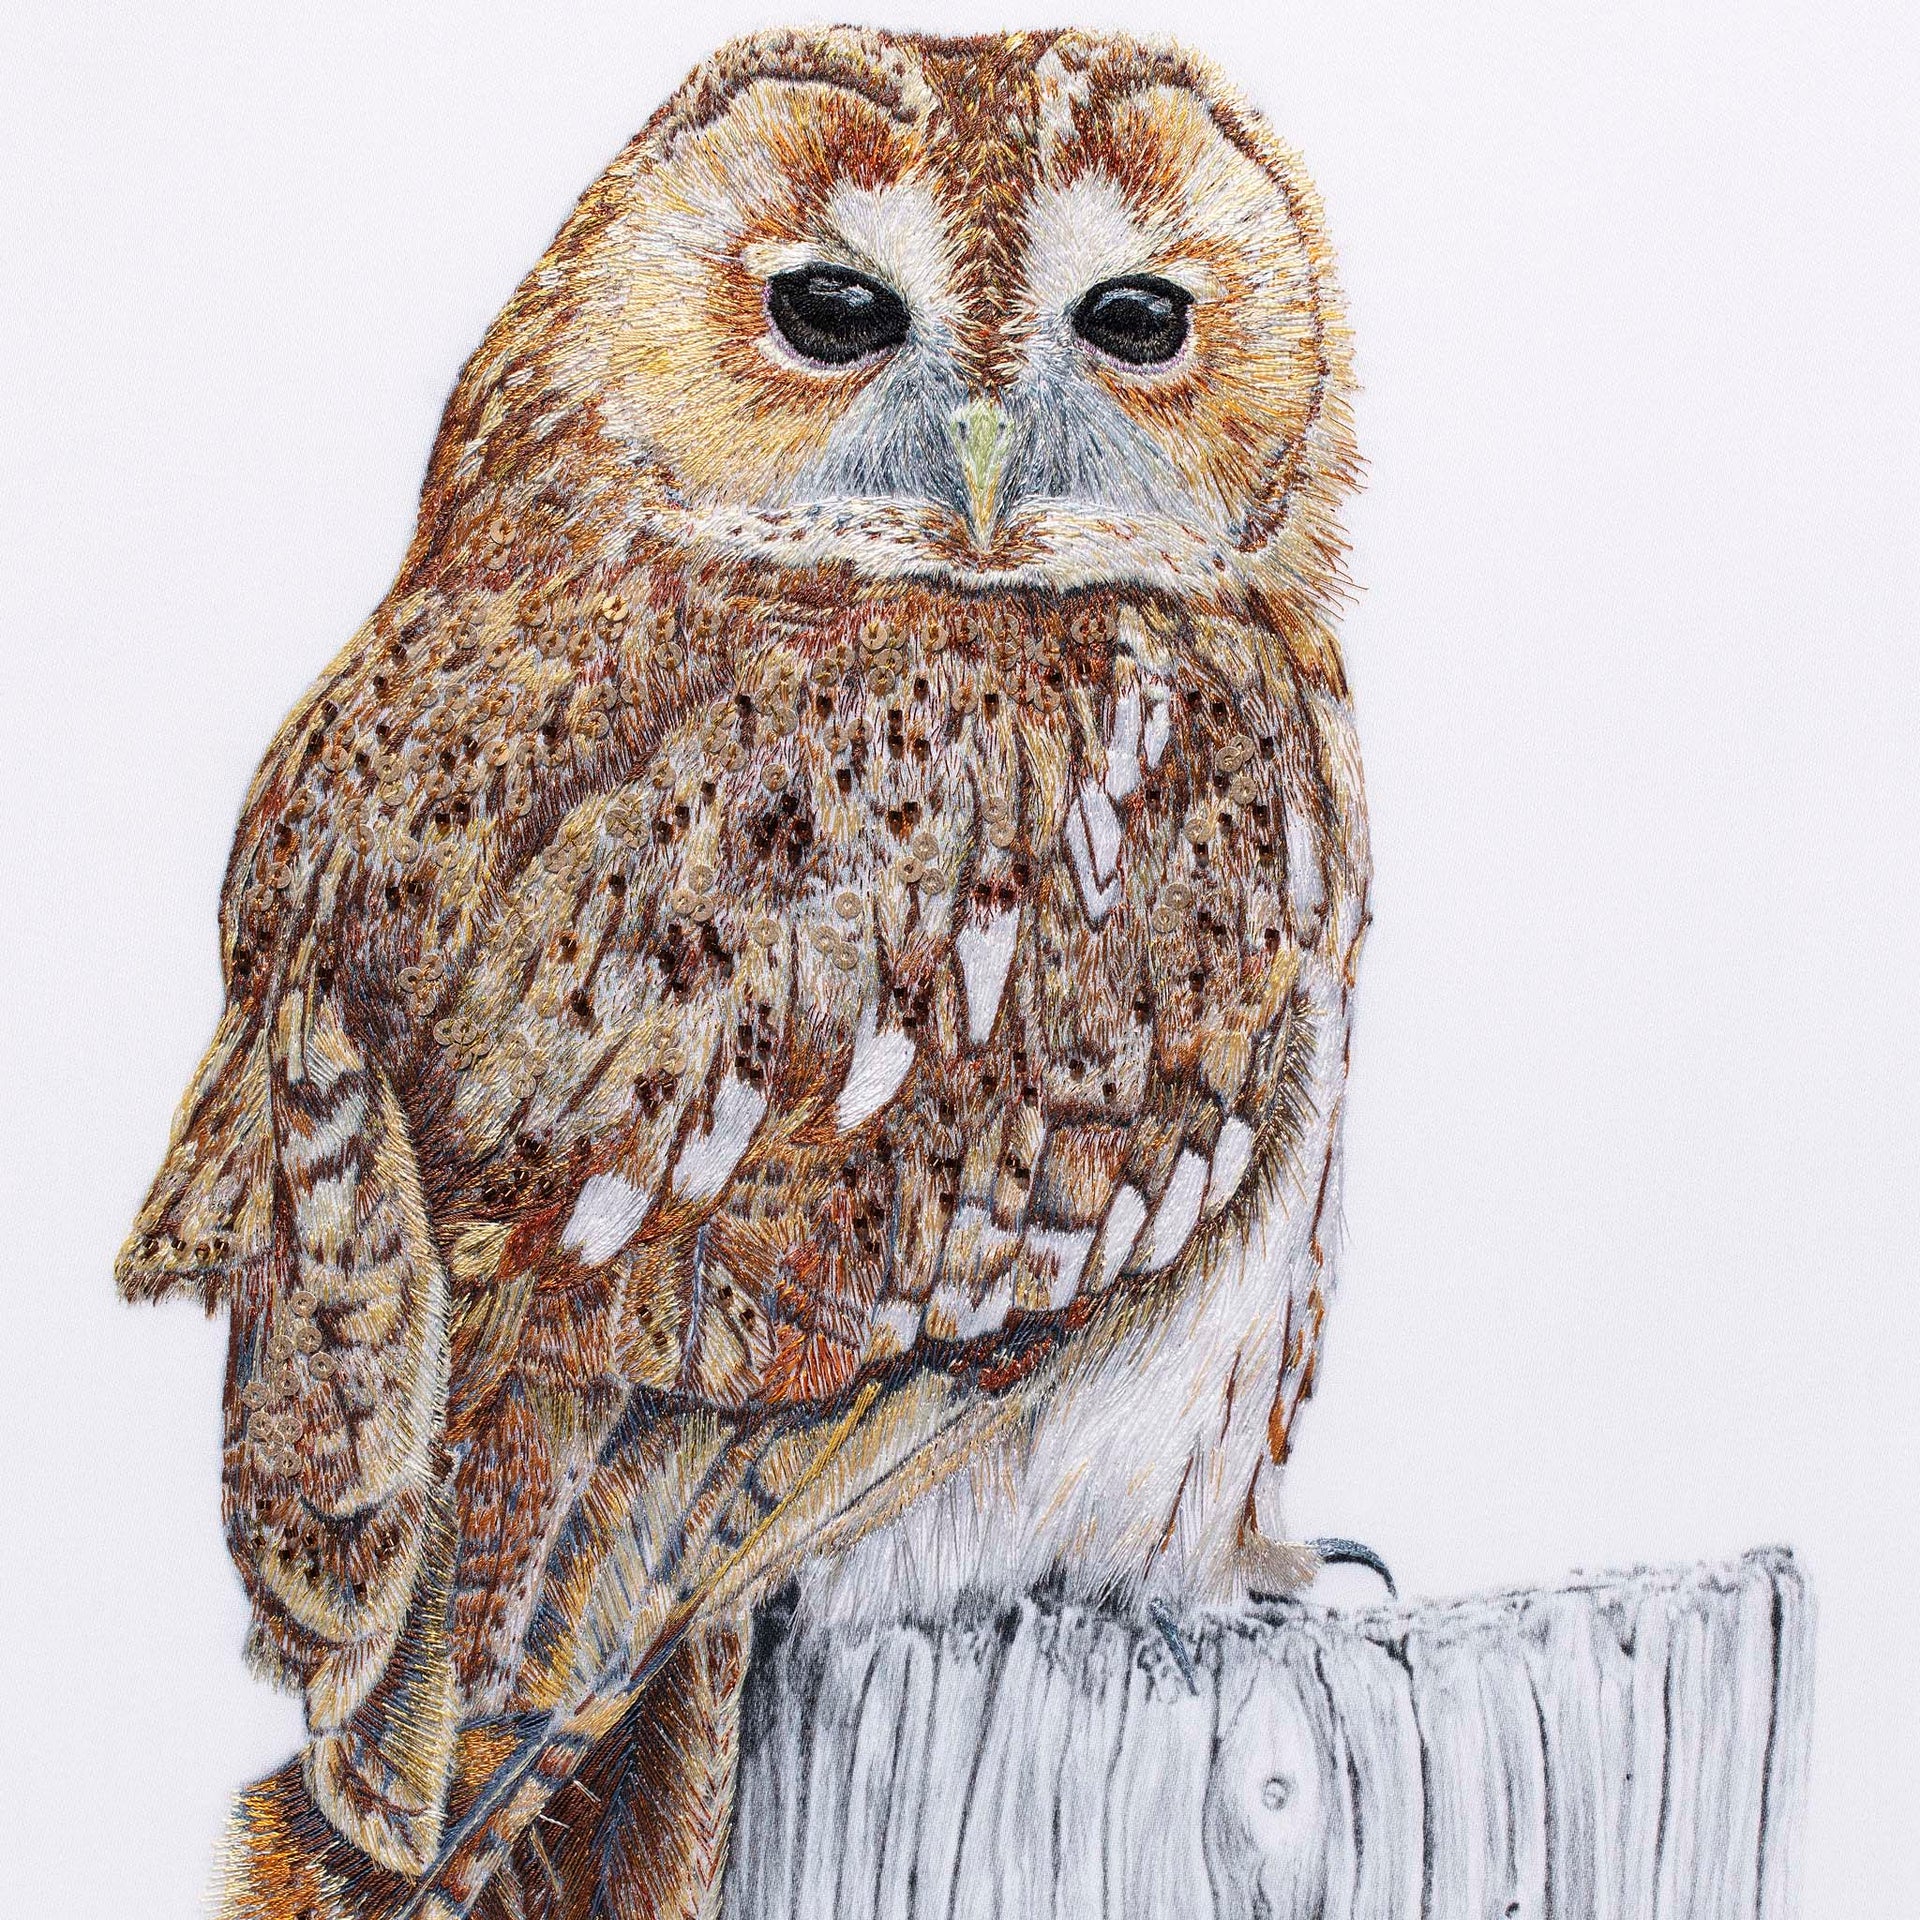 limited edition print of a Owl hand embroidery